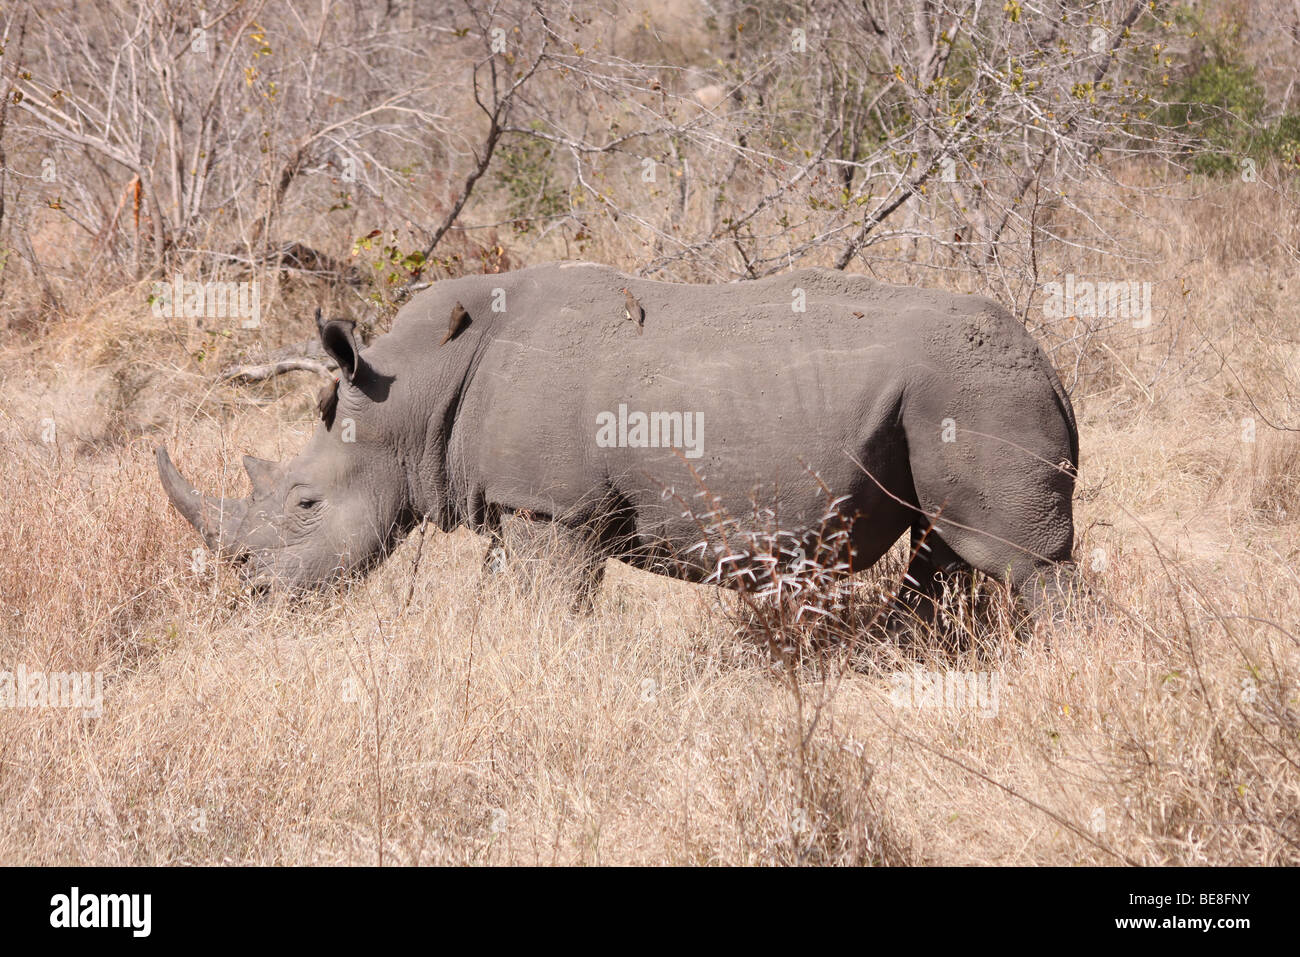 White Rhinoceros Ceratotherium simum In The Kruger National Park, South Africa Stock Photo